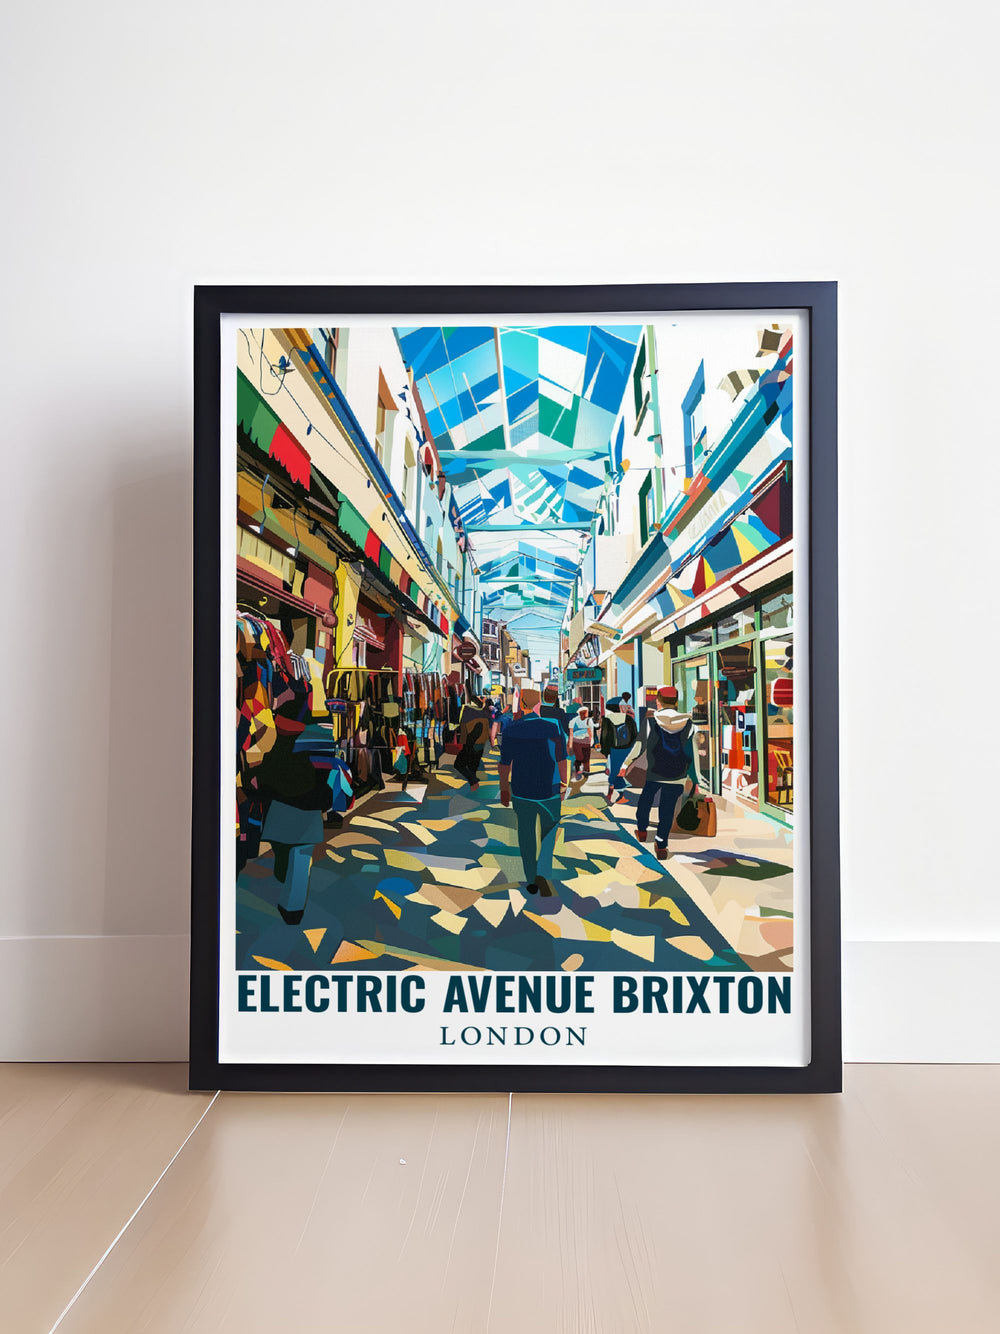 This travel poster captures the vibrant energy of Electric Avenue and Brixton Market, showcasing the lively atmosphere and cultural significance of this iconic London area.